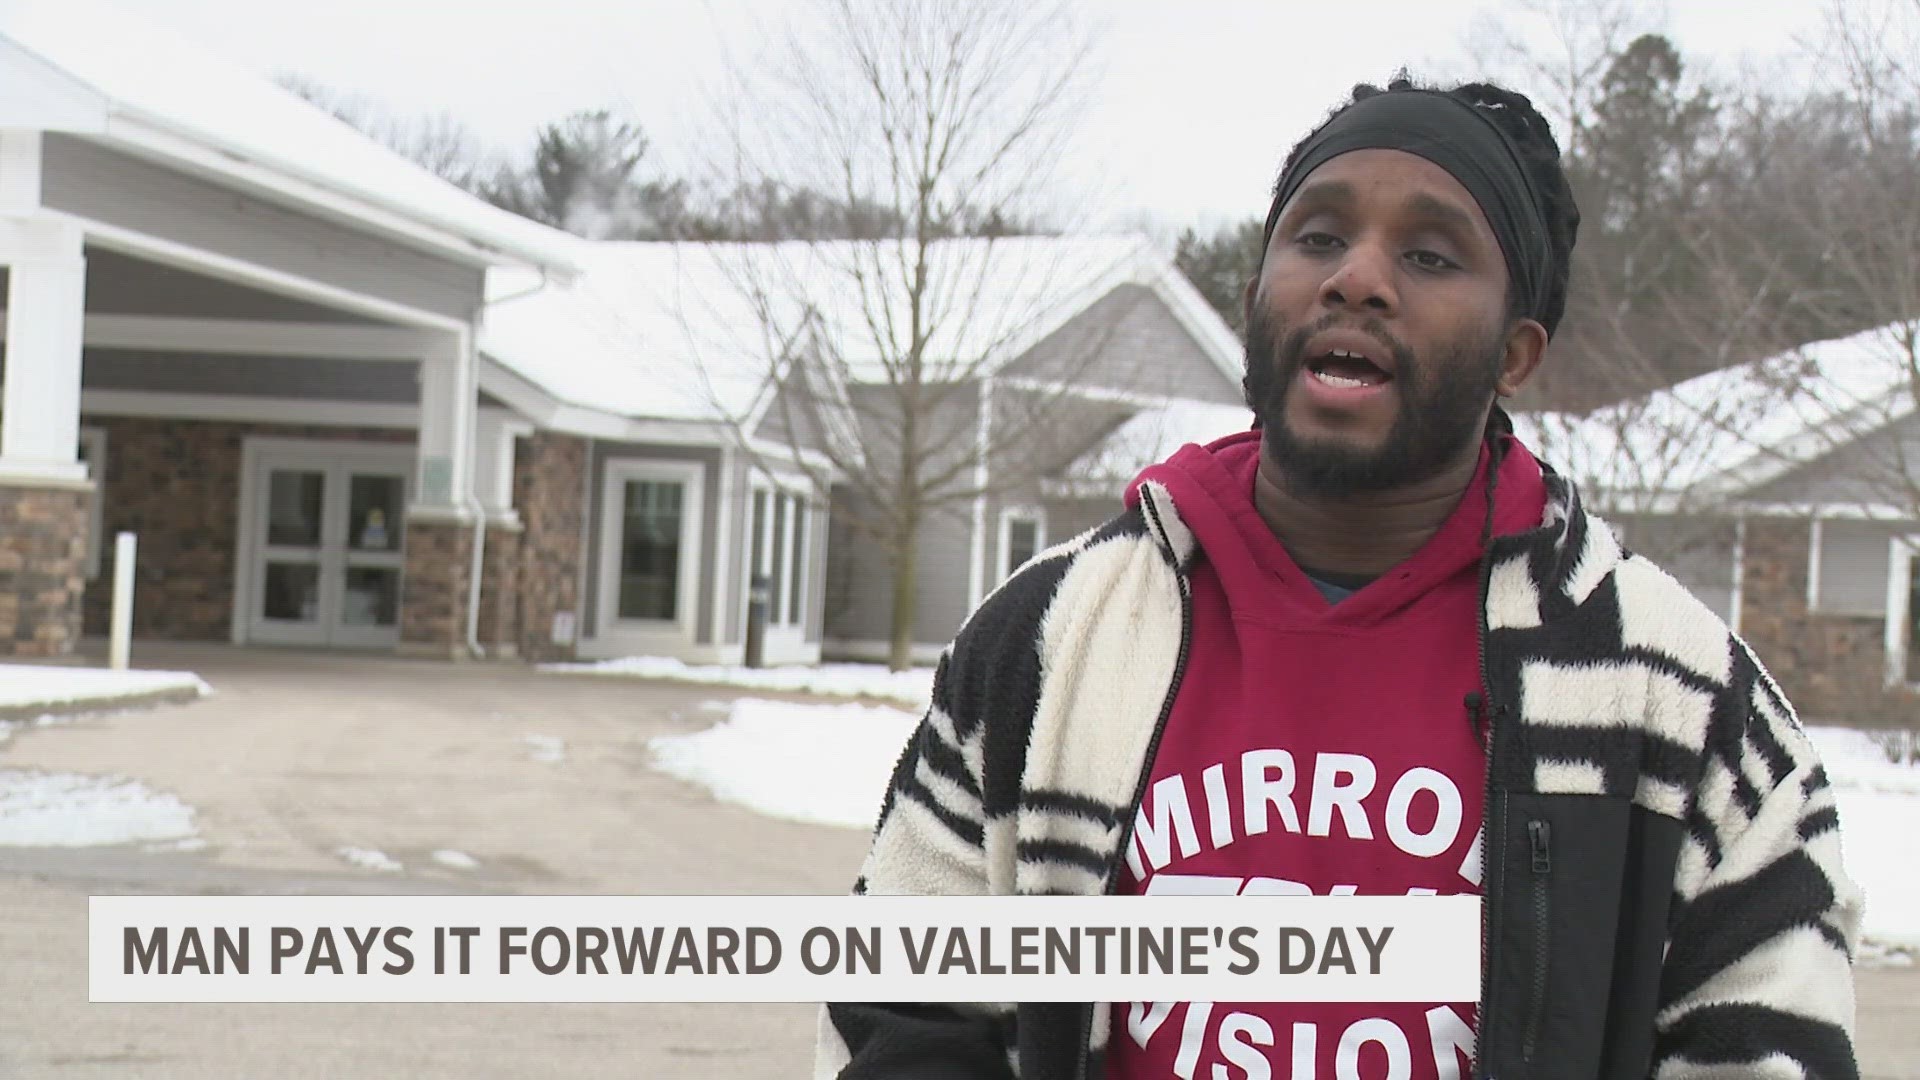 James Coffee said it was one of the best days of his life when he could love and spread joy on Valentine's Day with others.